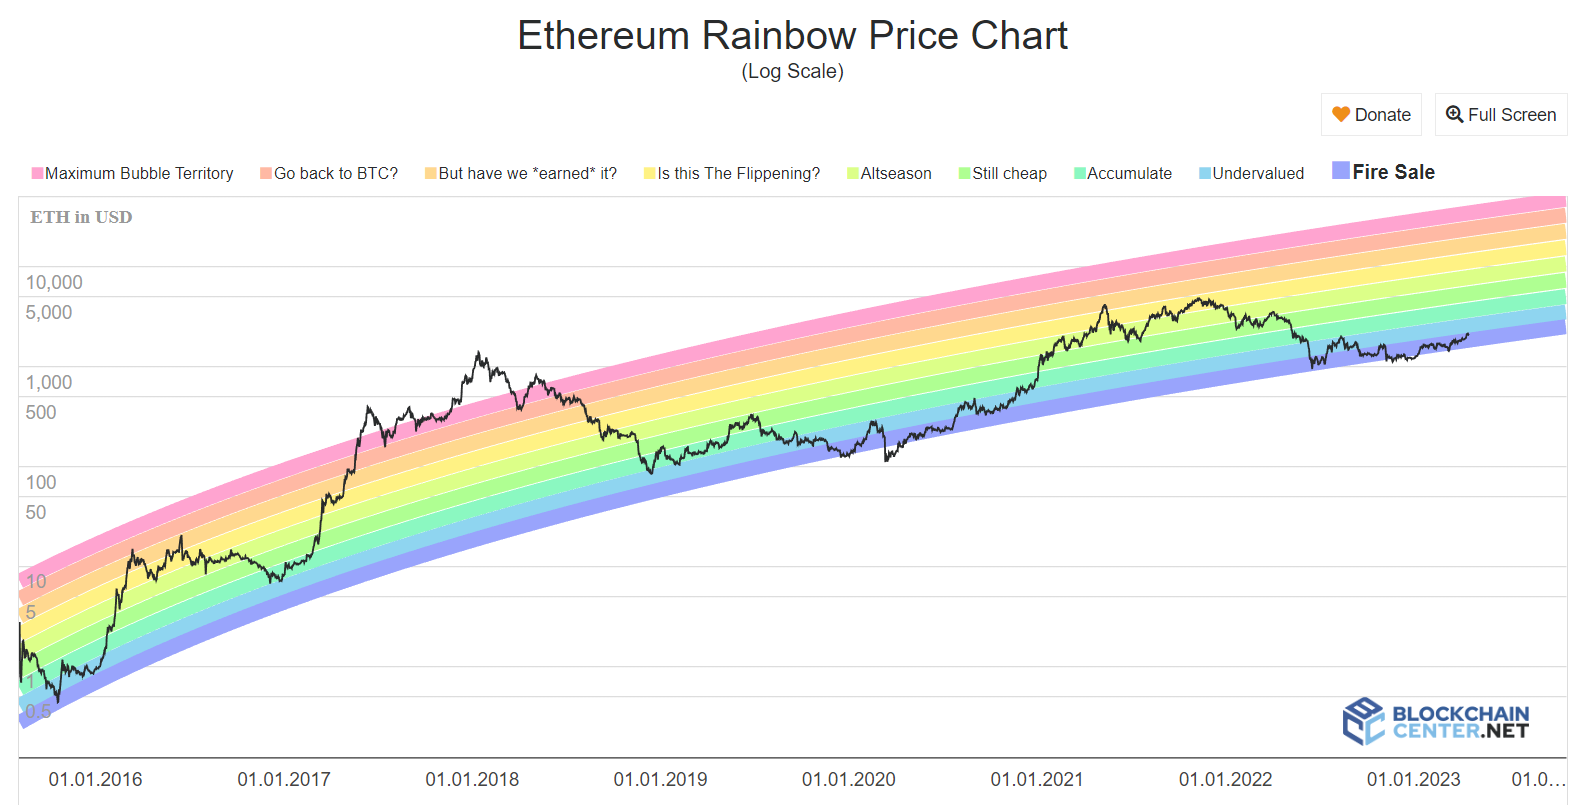 Ethereum price today, ETH to USD live price, marketcap and chart | CoinMarketCap